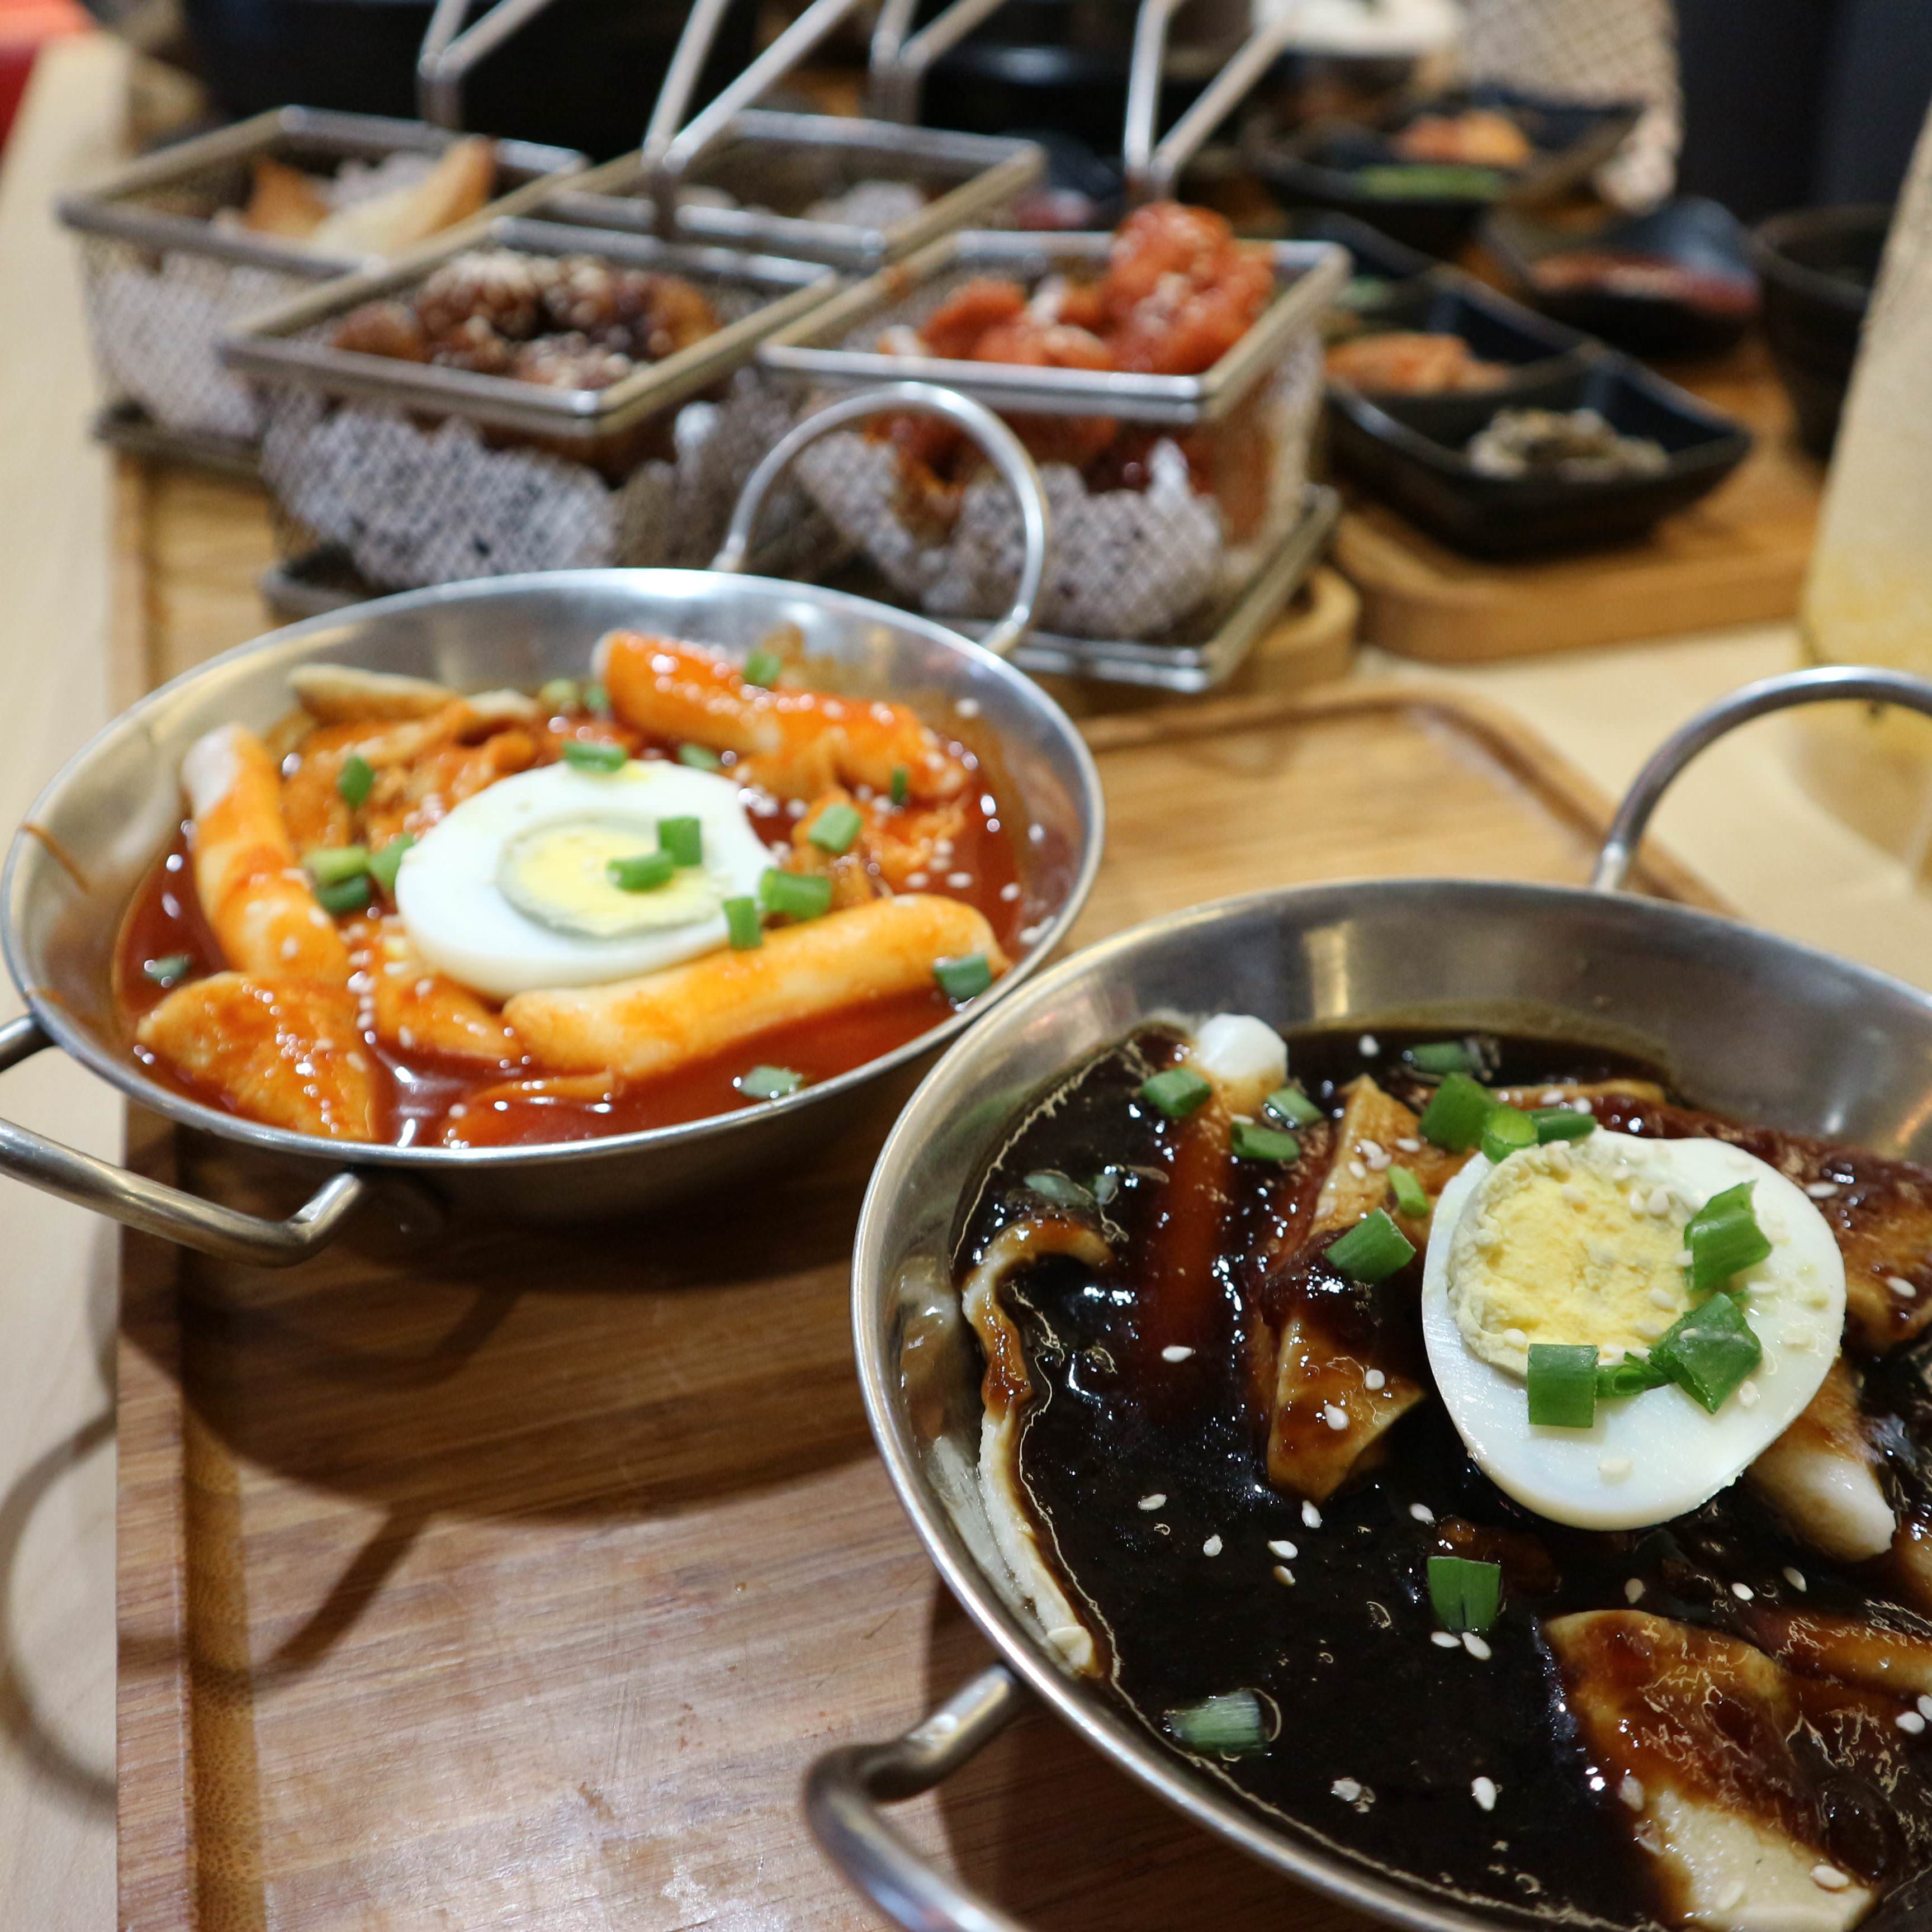 This Popular Korean Street Food Used To Be Reserved For Royalty Only